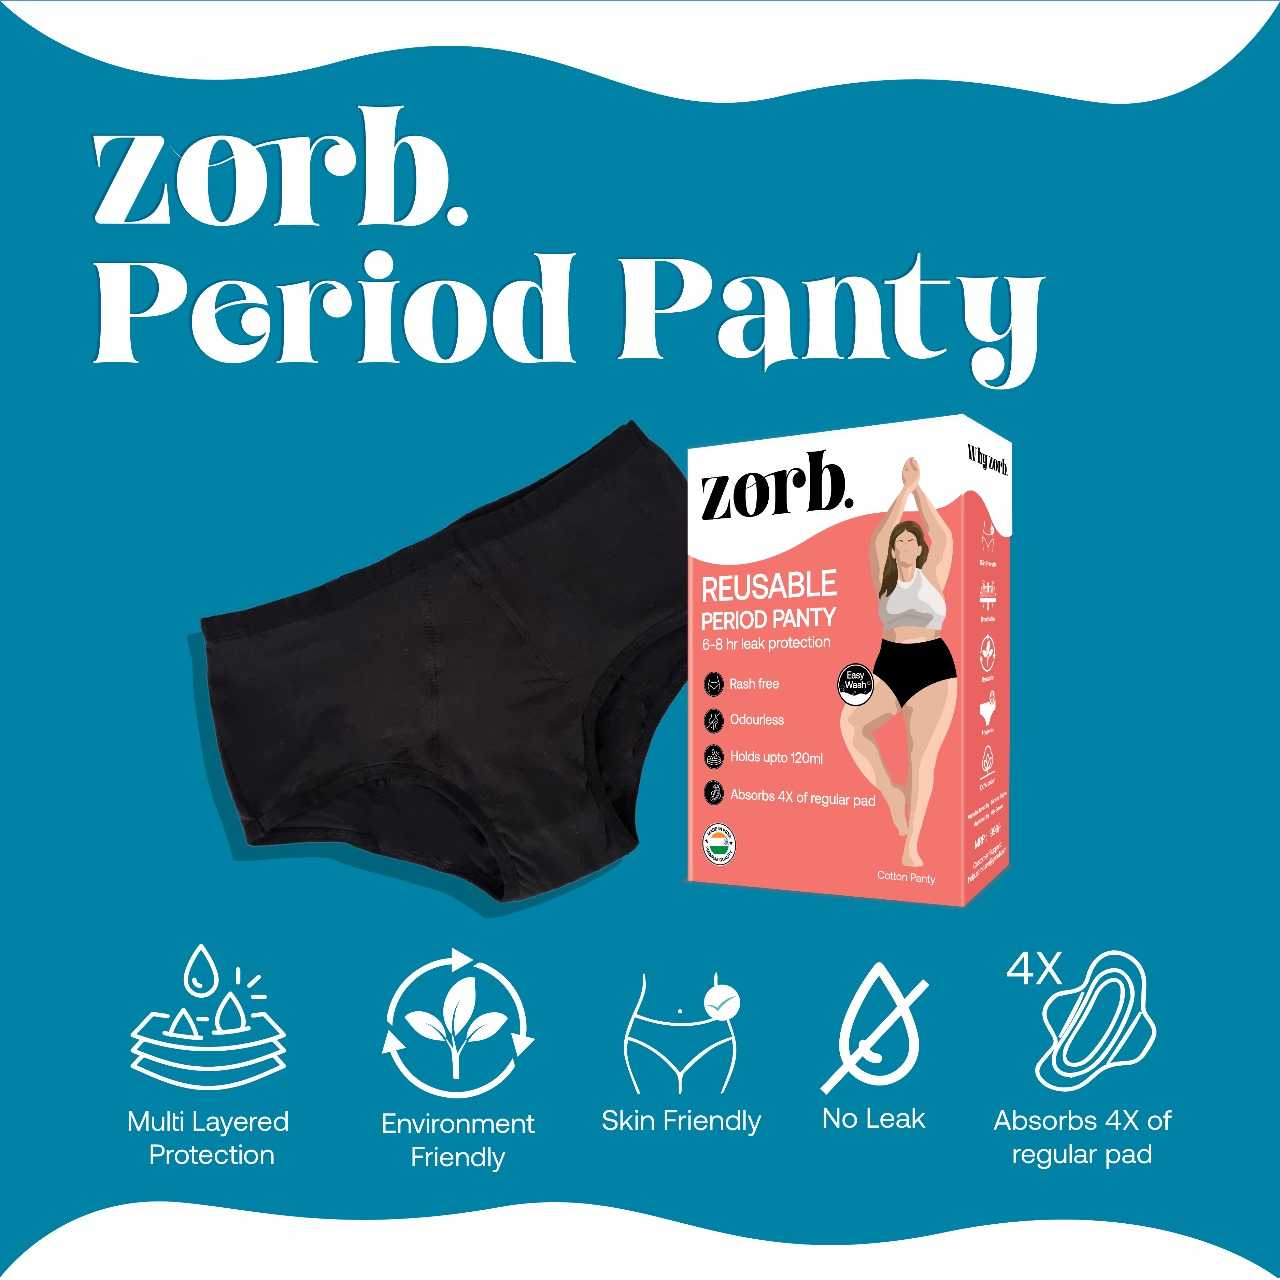 Zorb. Reusable Period Panty (Navy Blue)